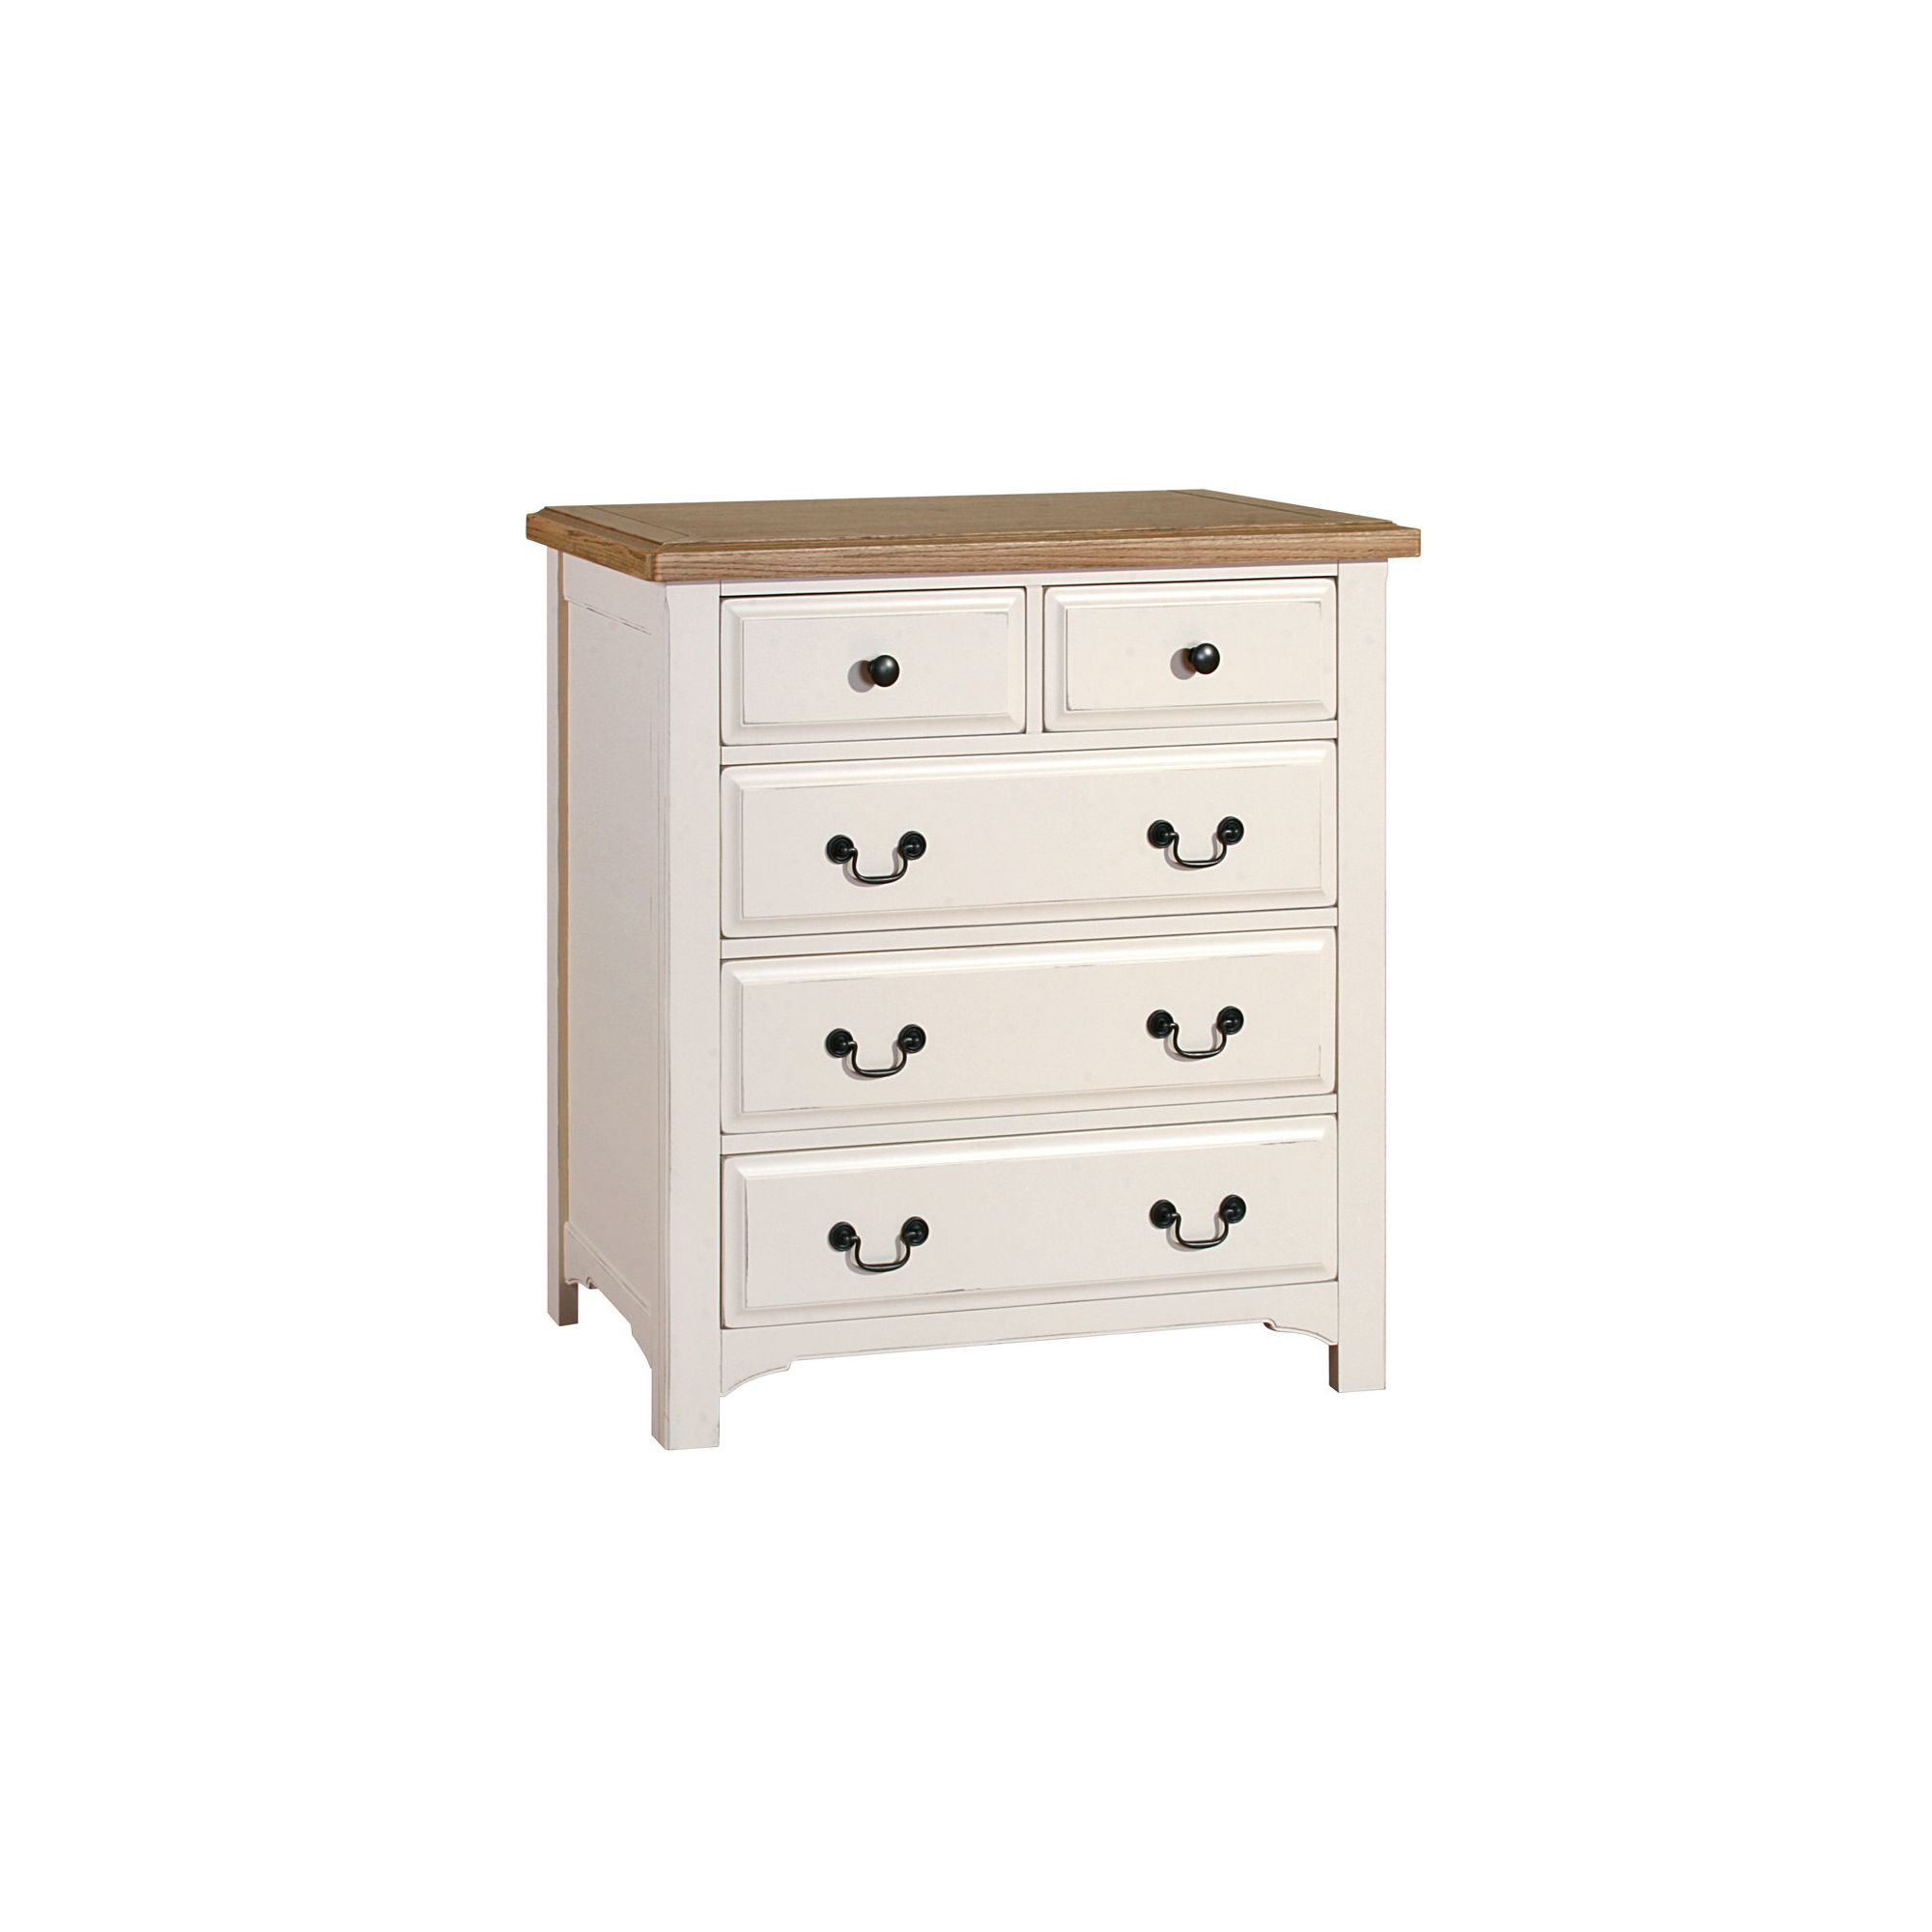 Alterton Furniture Marseille 2 over 3 Drawer Deep Chest at Tescos Direct